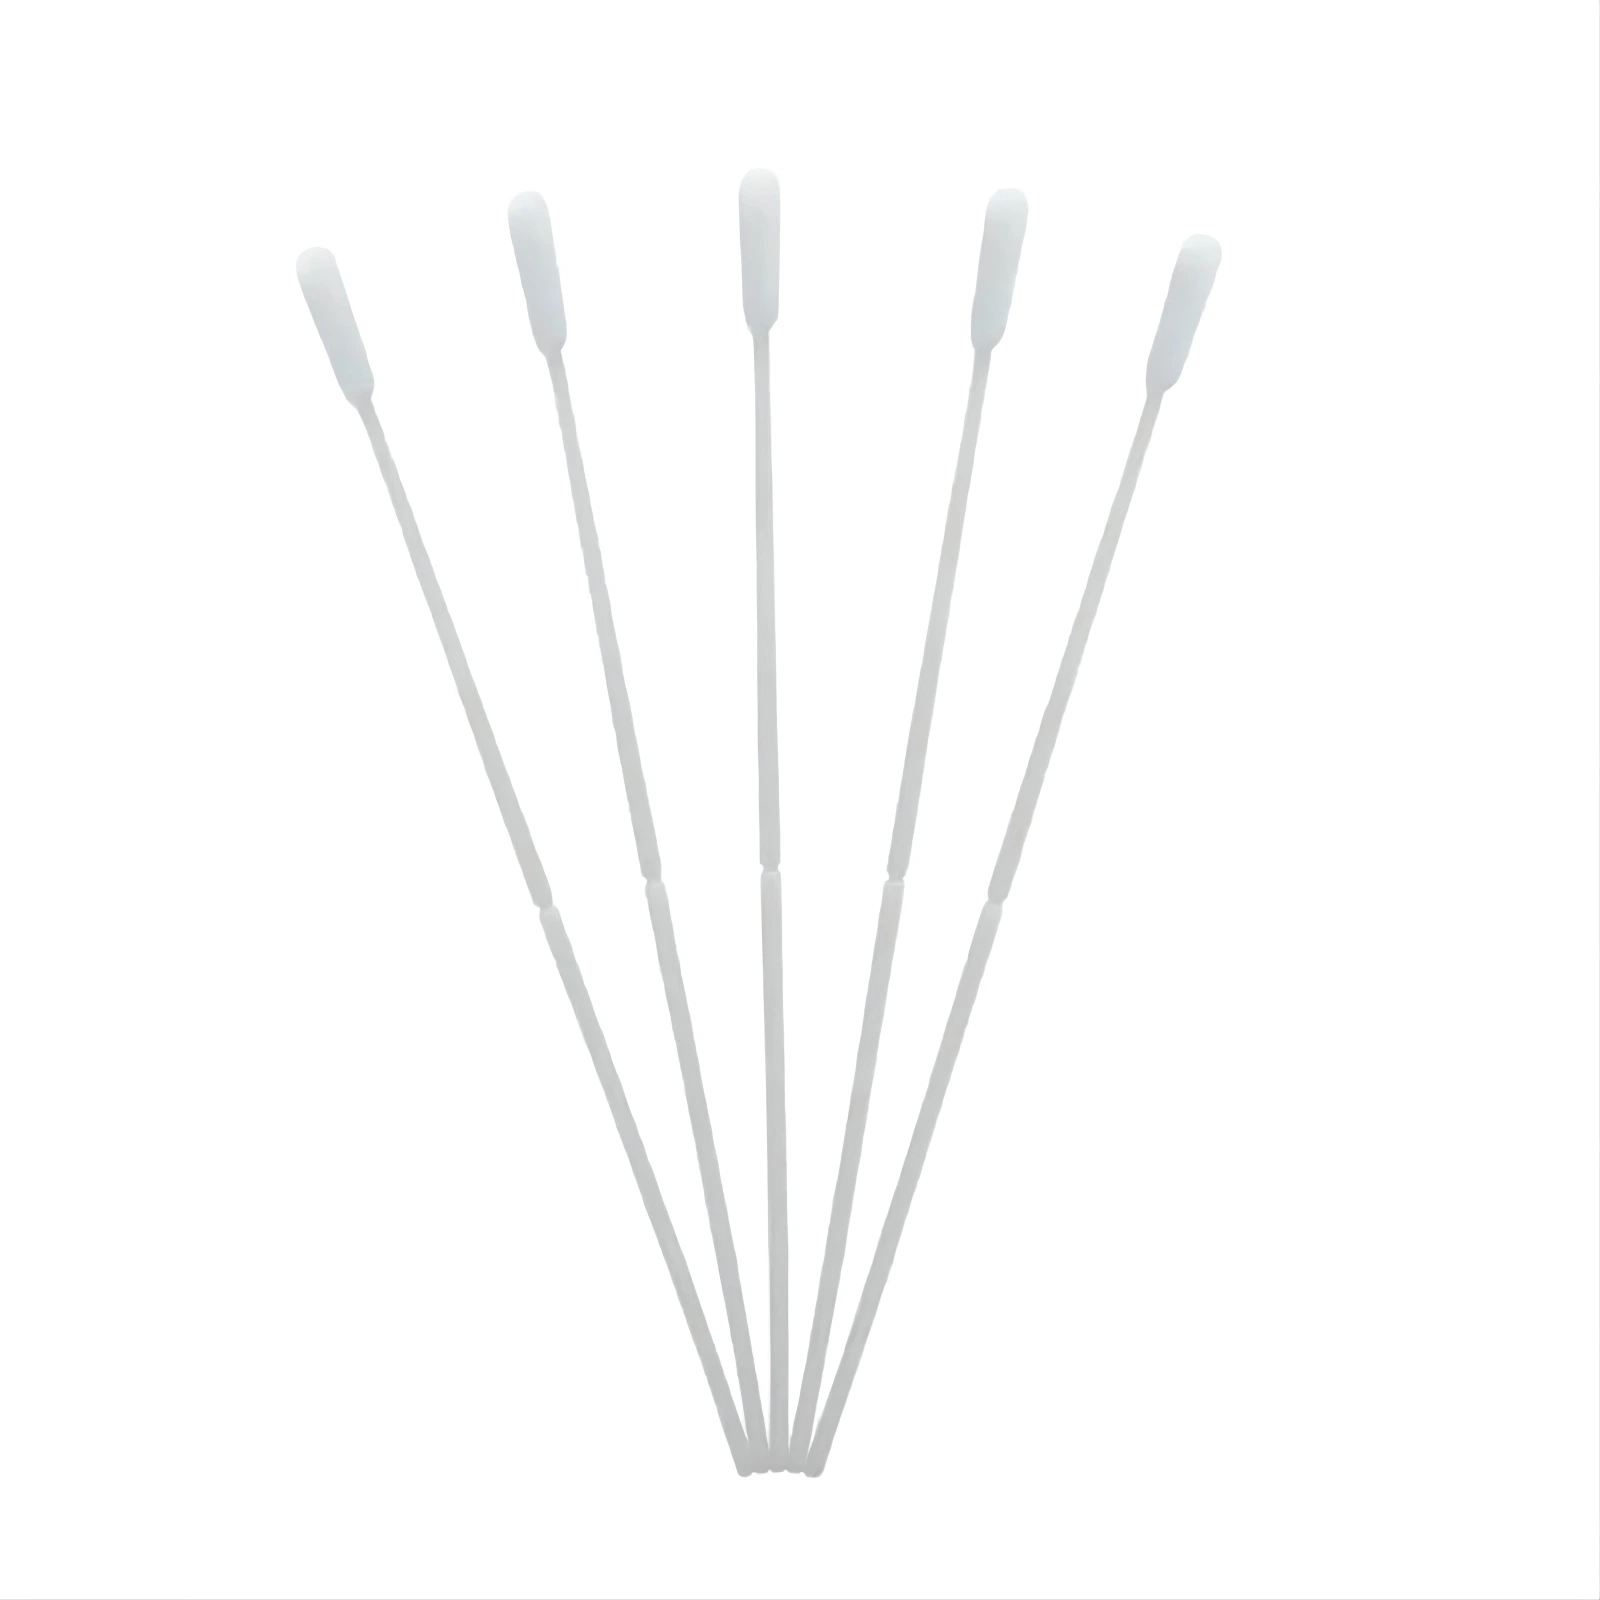 Disposable Sterile Flocked Sampling Oral Mouth Buccal Cell Swab Sticks Individually Wrapped 15cm/3cm Breakpoint